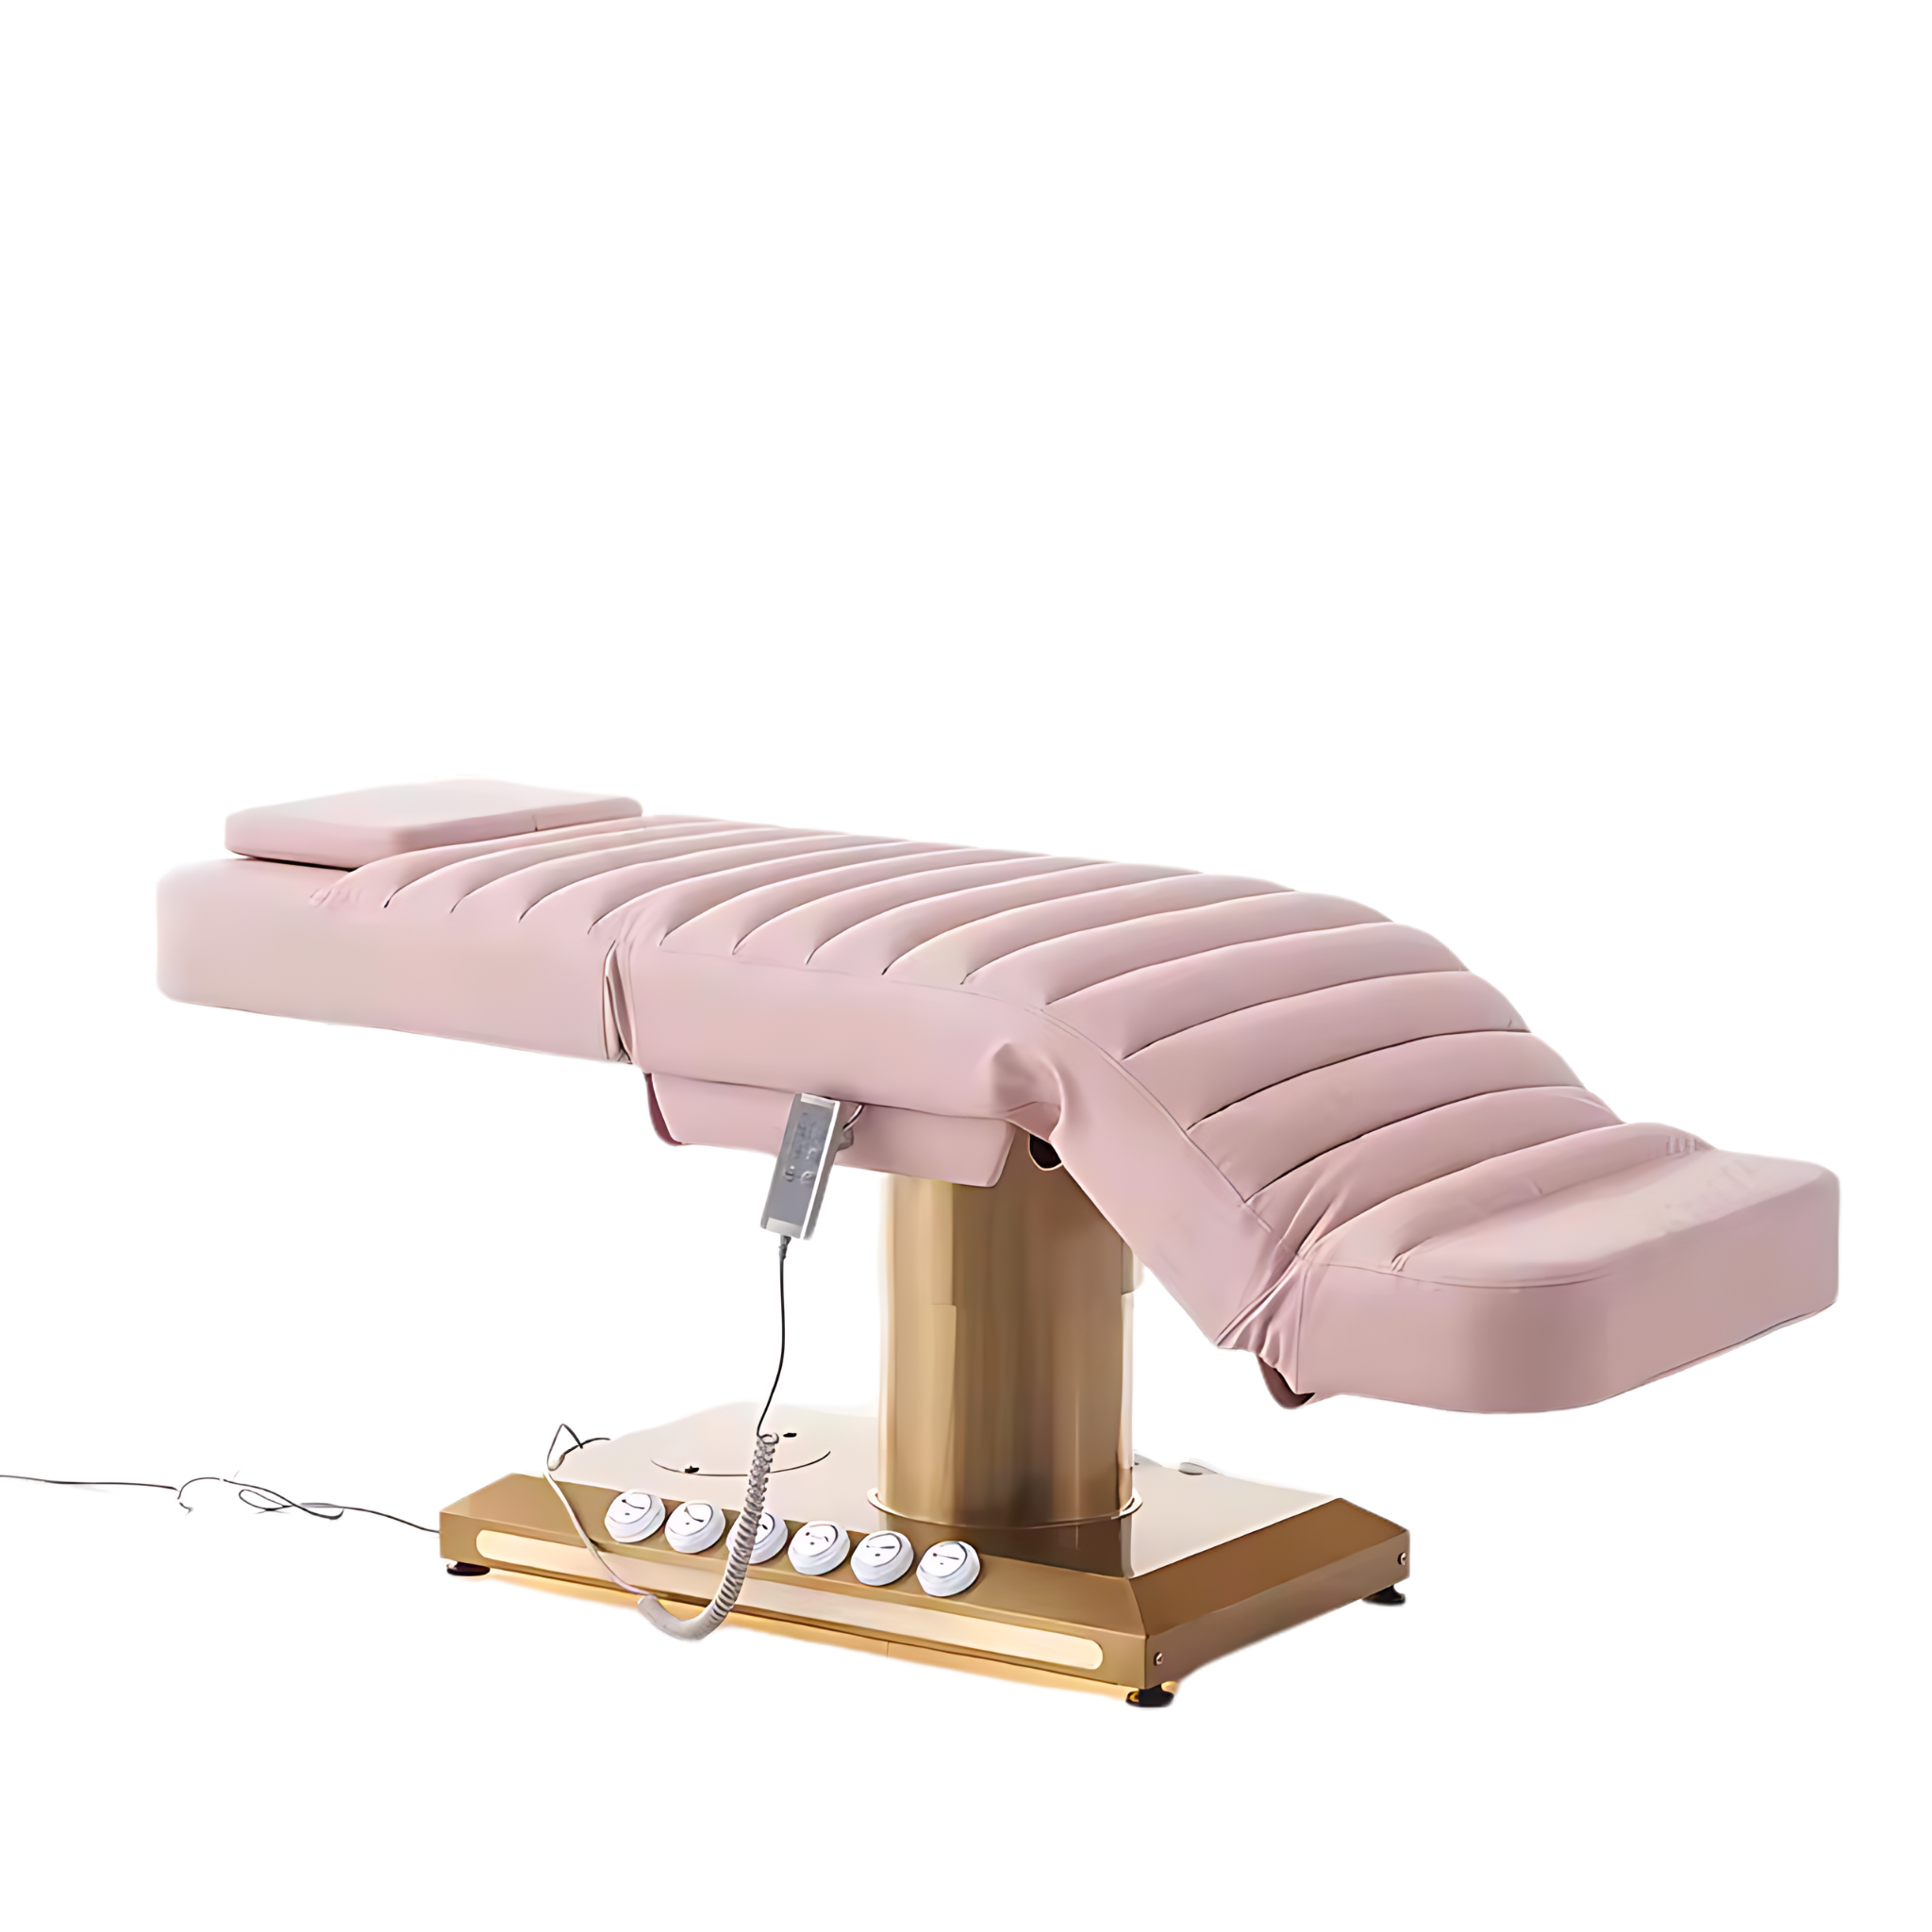 The Cloud Beauty Bed